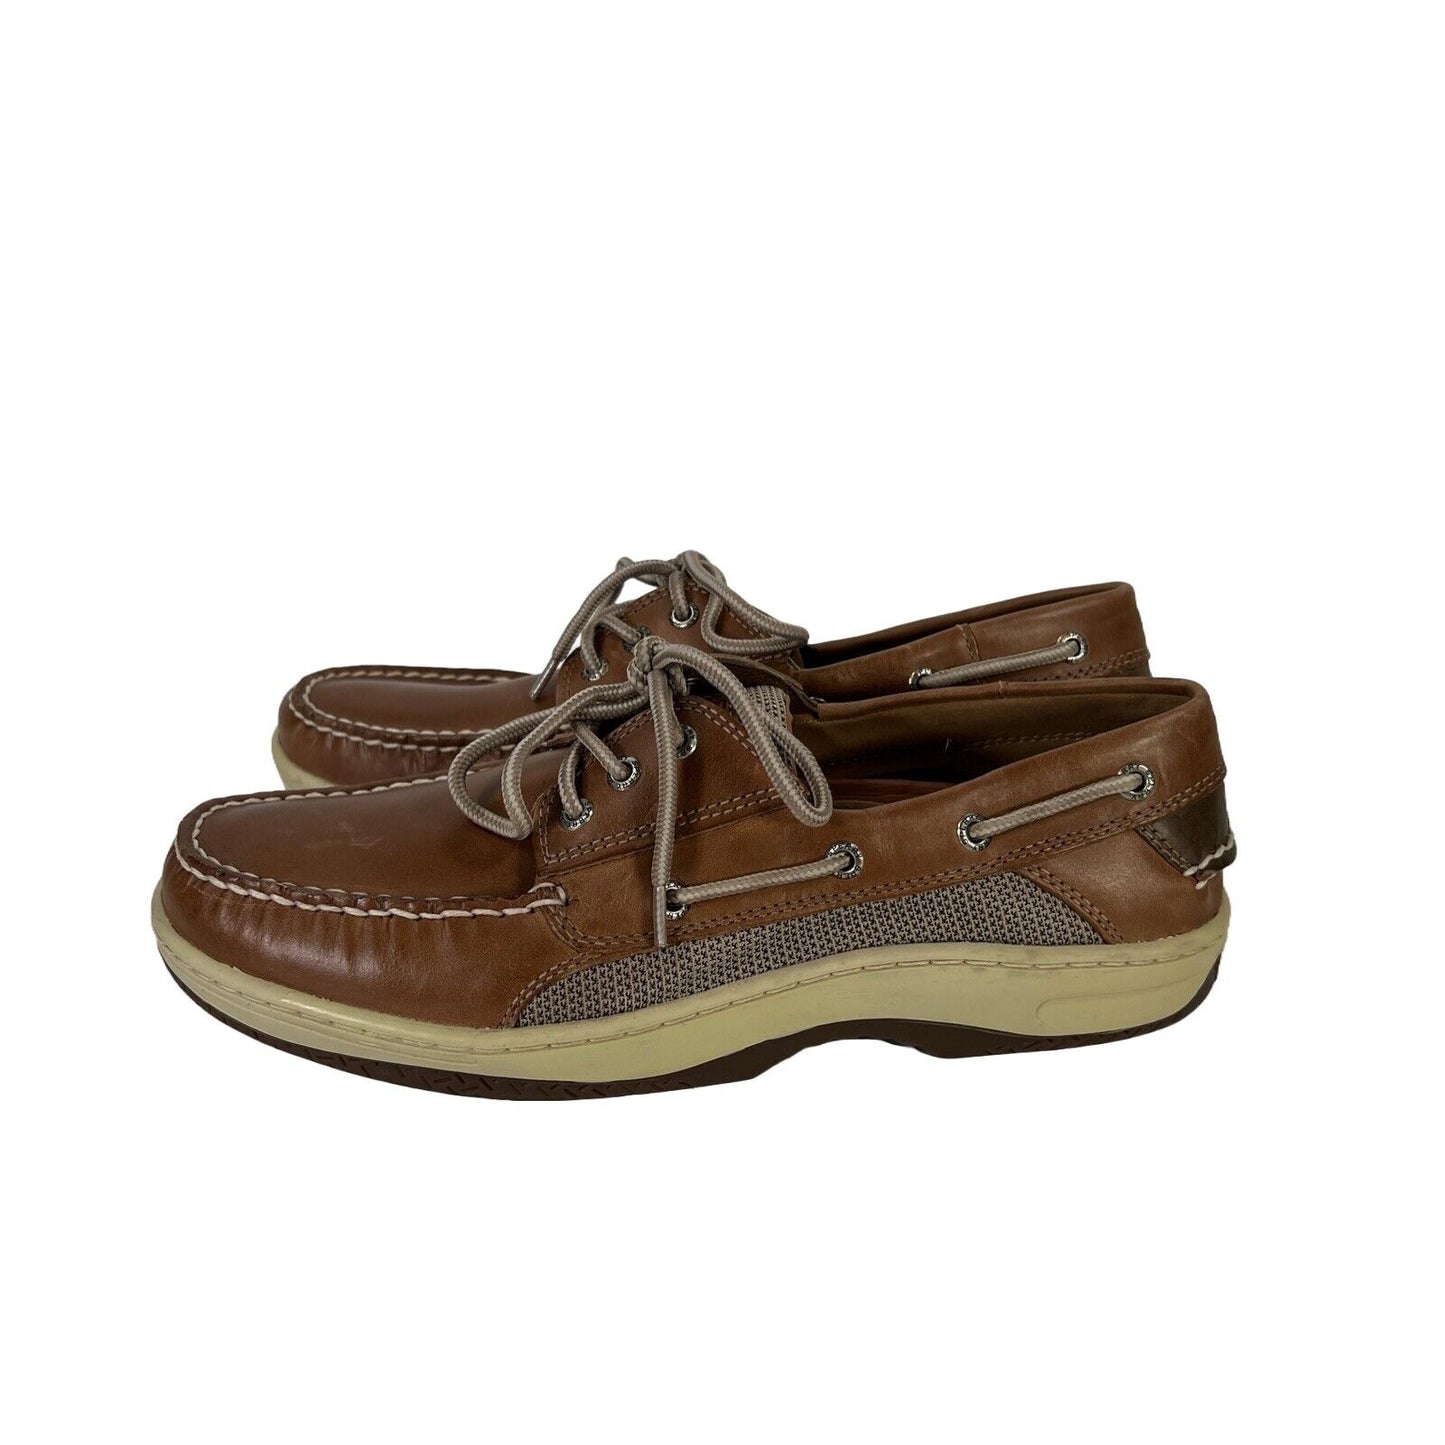 Sperry Men's Brown Leather Billfish 3 Eye Boat Shoes - 10 Wide